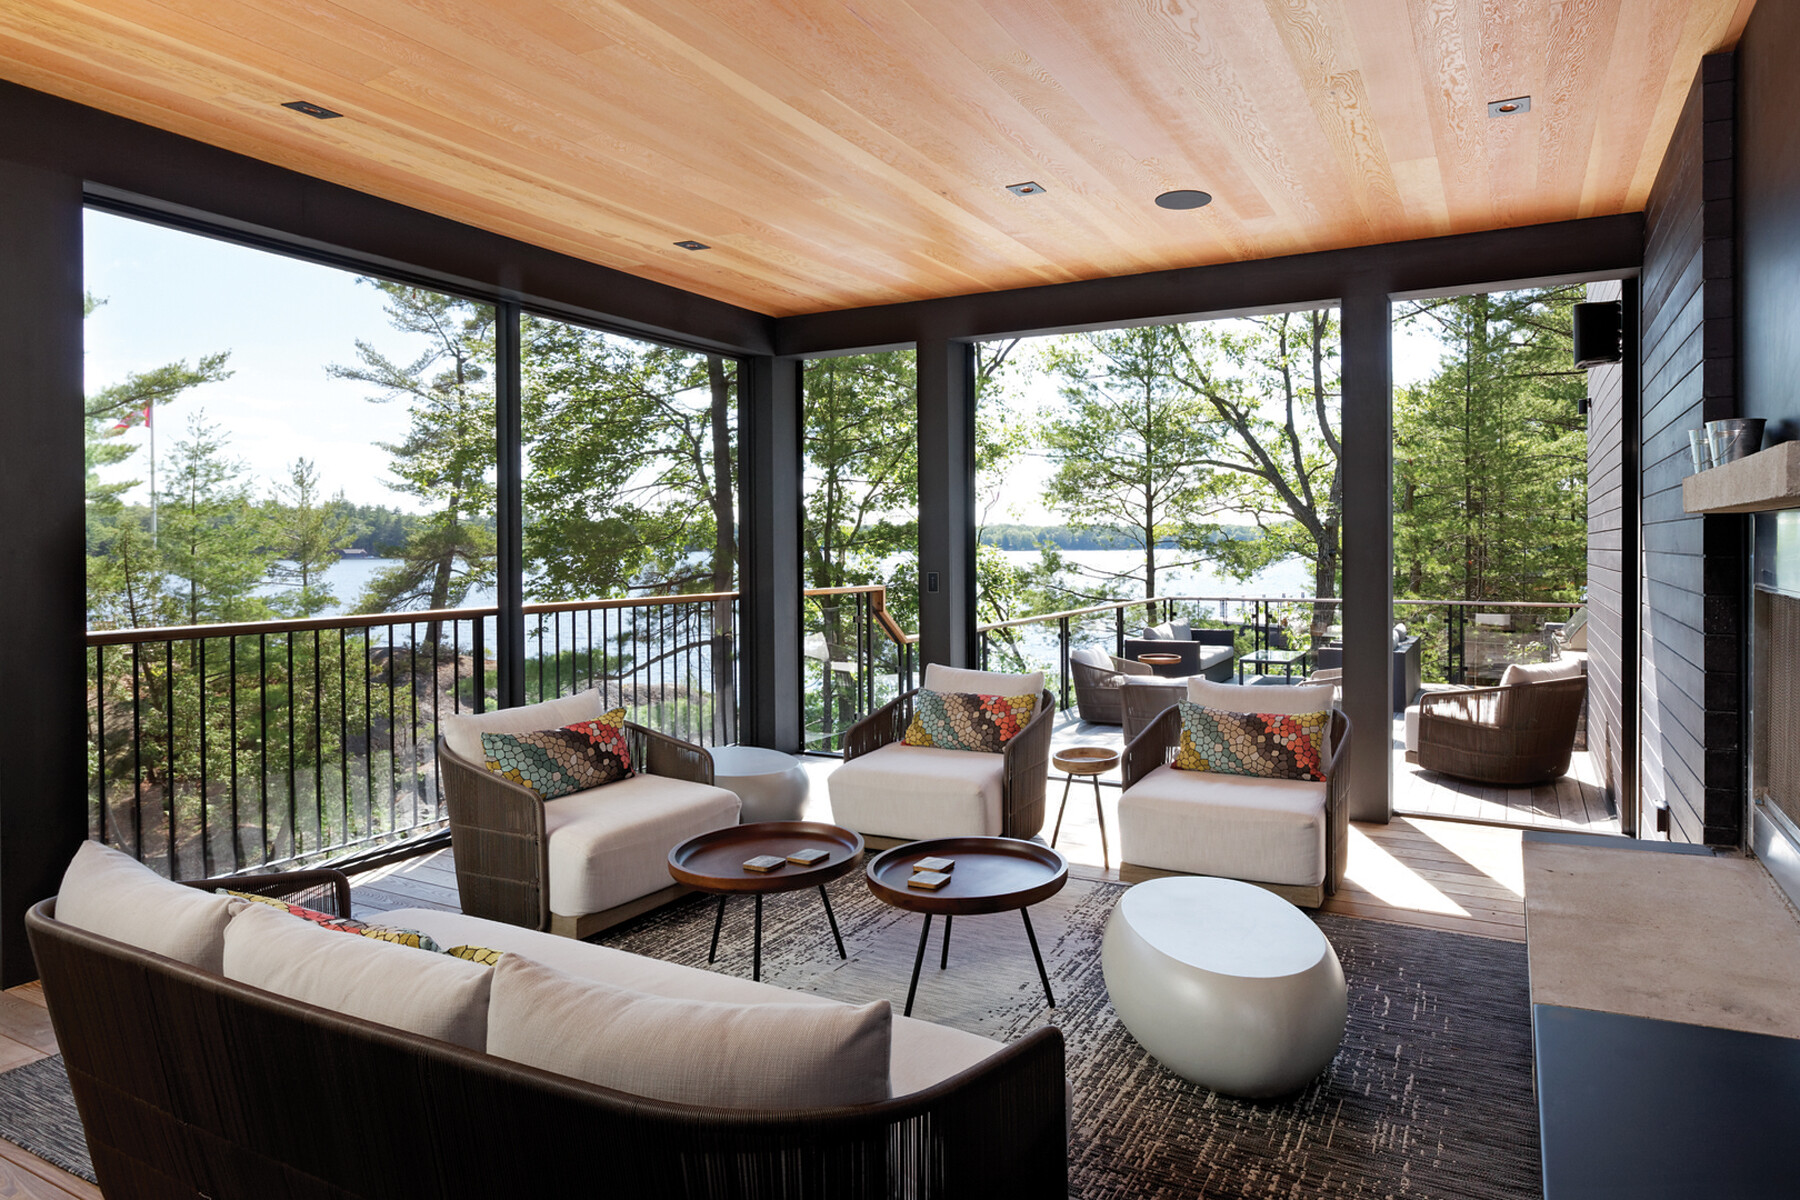 Screened porch with wood ceiling showing open connection to outdoor patio with views of trees and lake